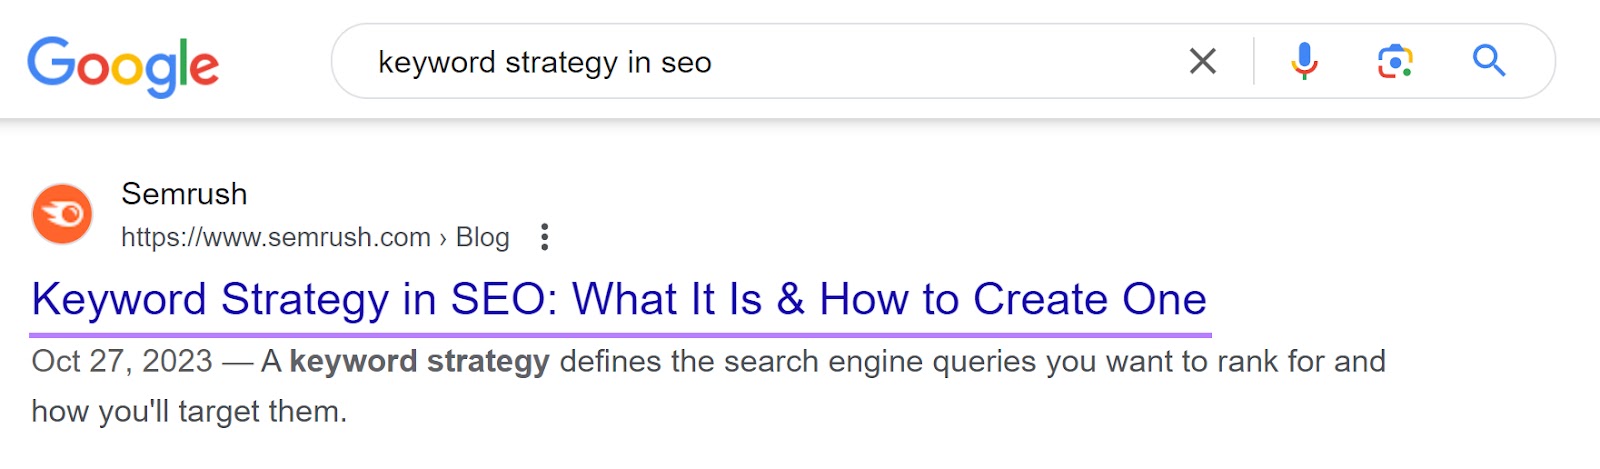 Title tag of a Semrush article as it appears in the Google Search Engine Results Page.